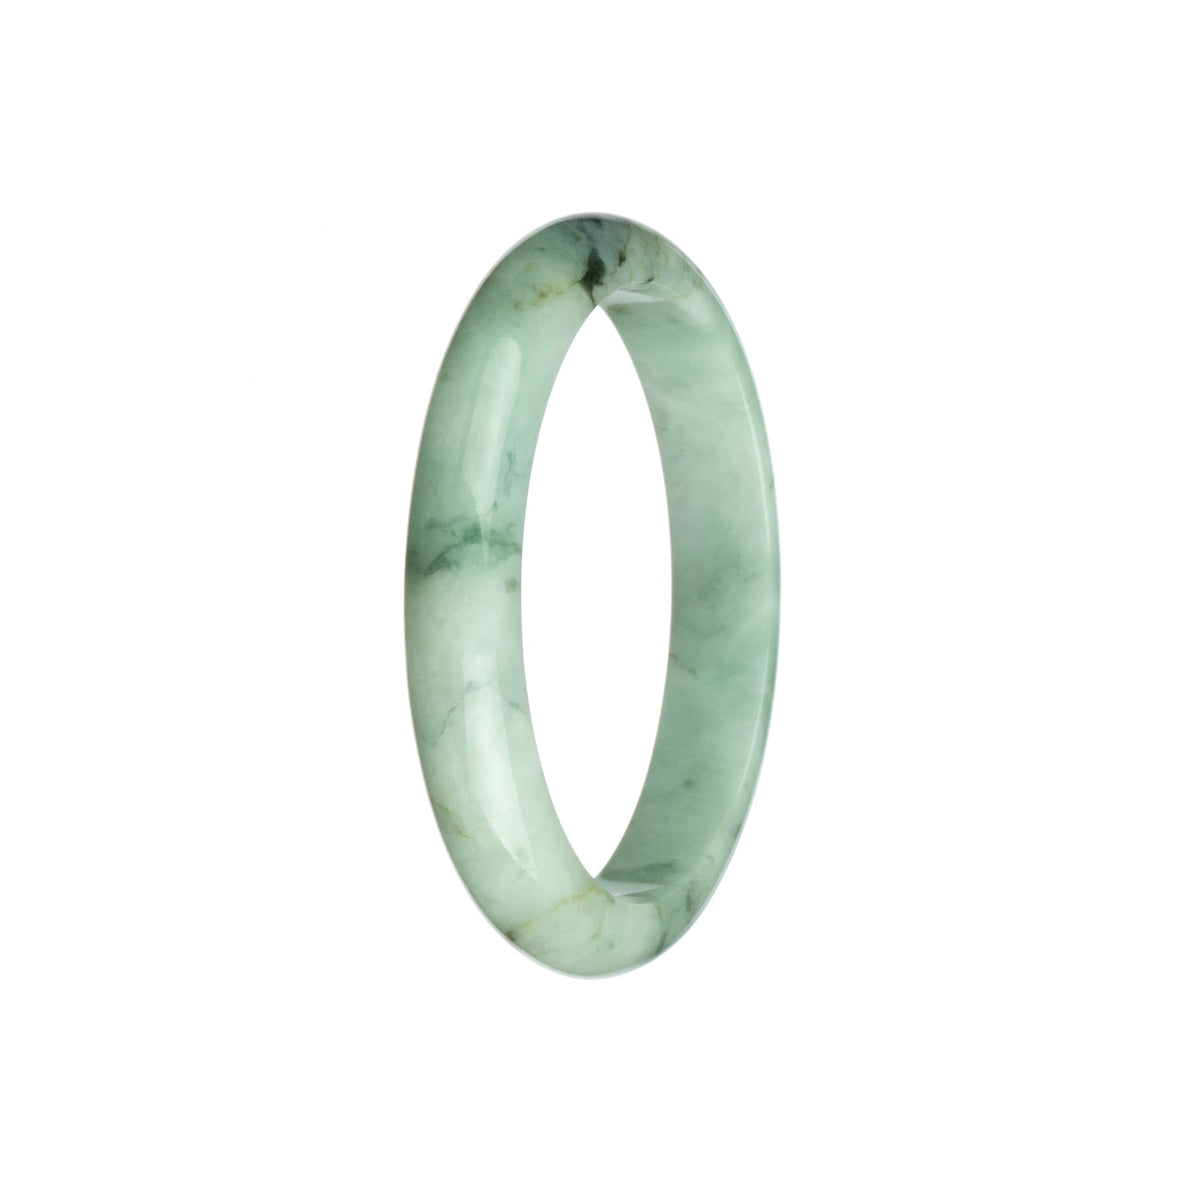 A white jade bangle bracelet featuring a unique pattern, crafted without any treatment or enhancements. The bracelet has a half-moon shape and measures 58mm in diameter. It is certified for its authenticity and high-quality craftsmanship. Perfect for adding a touch of elegance to any outfit.